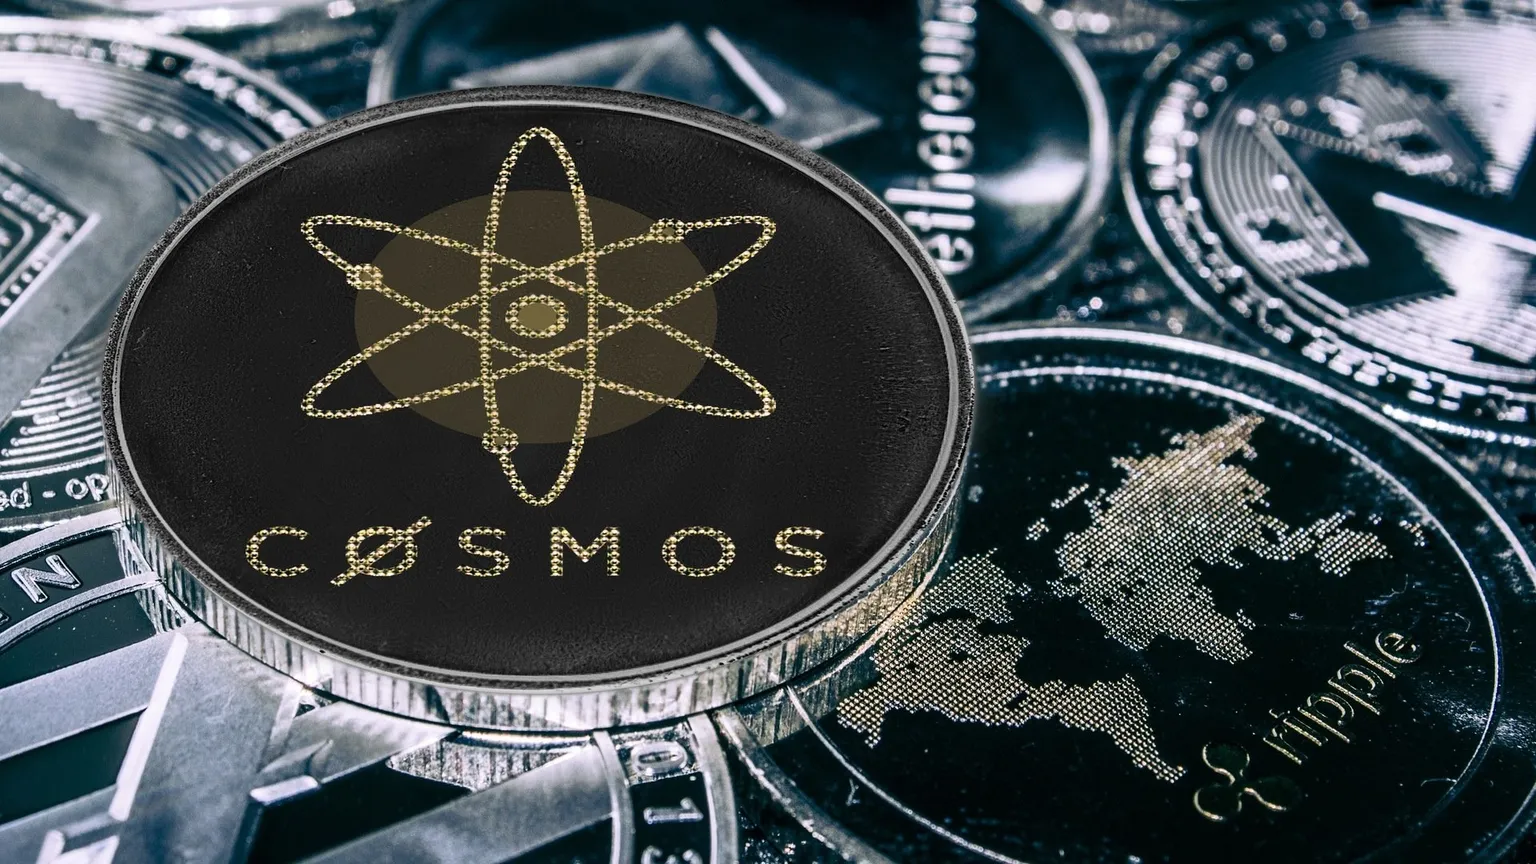 Cosmos is ranked 23 by market cap. Image: Shutterstock.